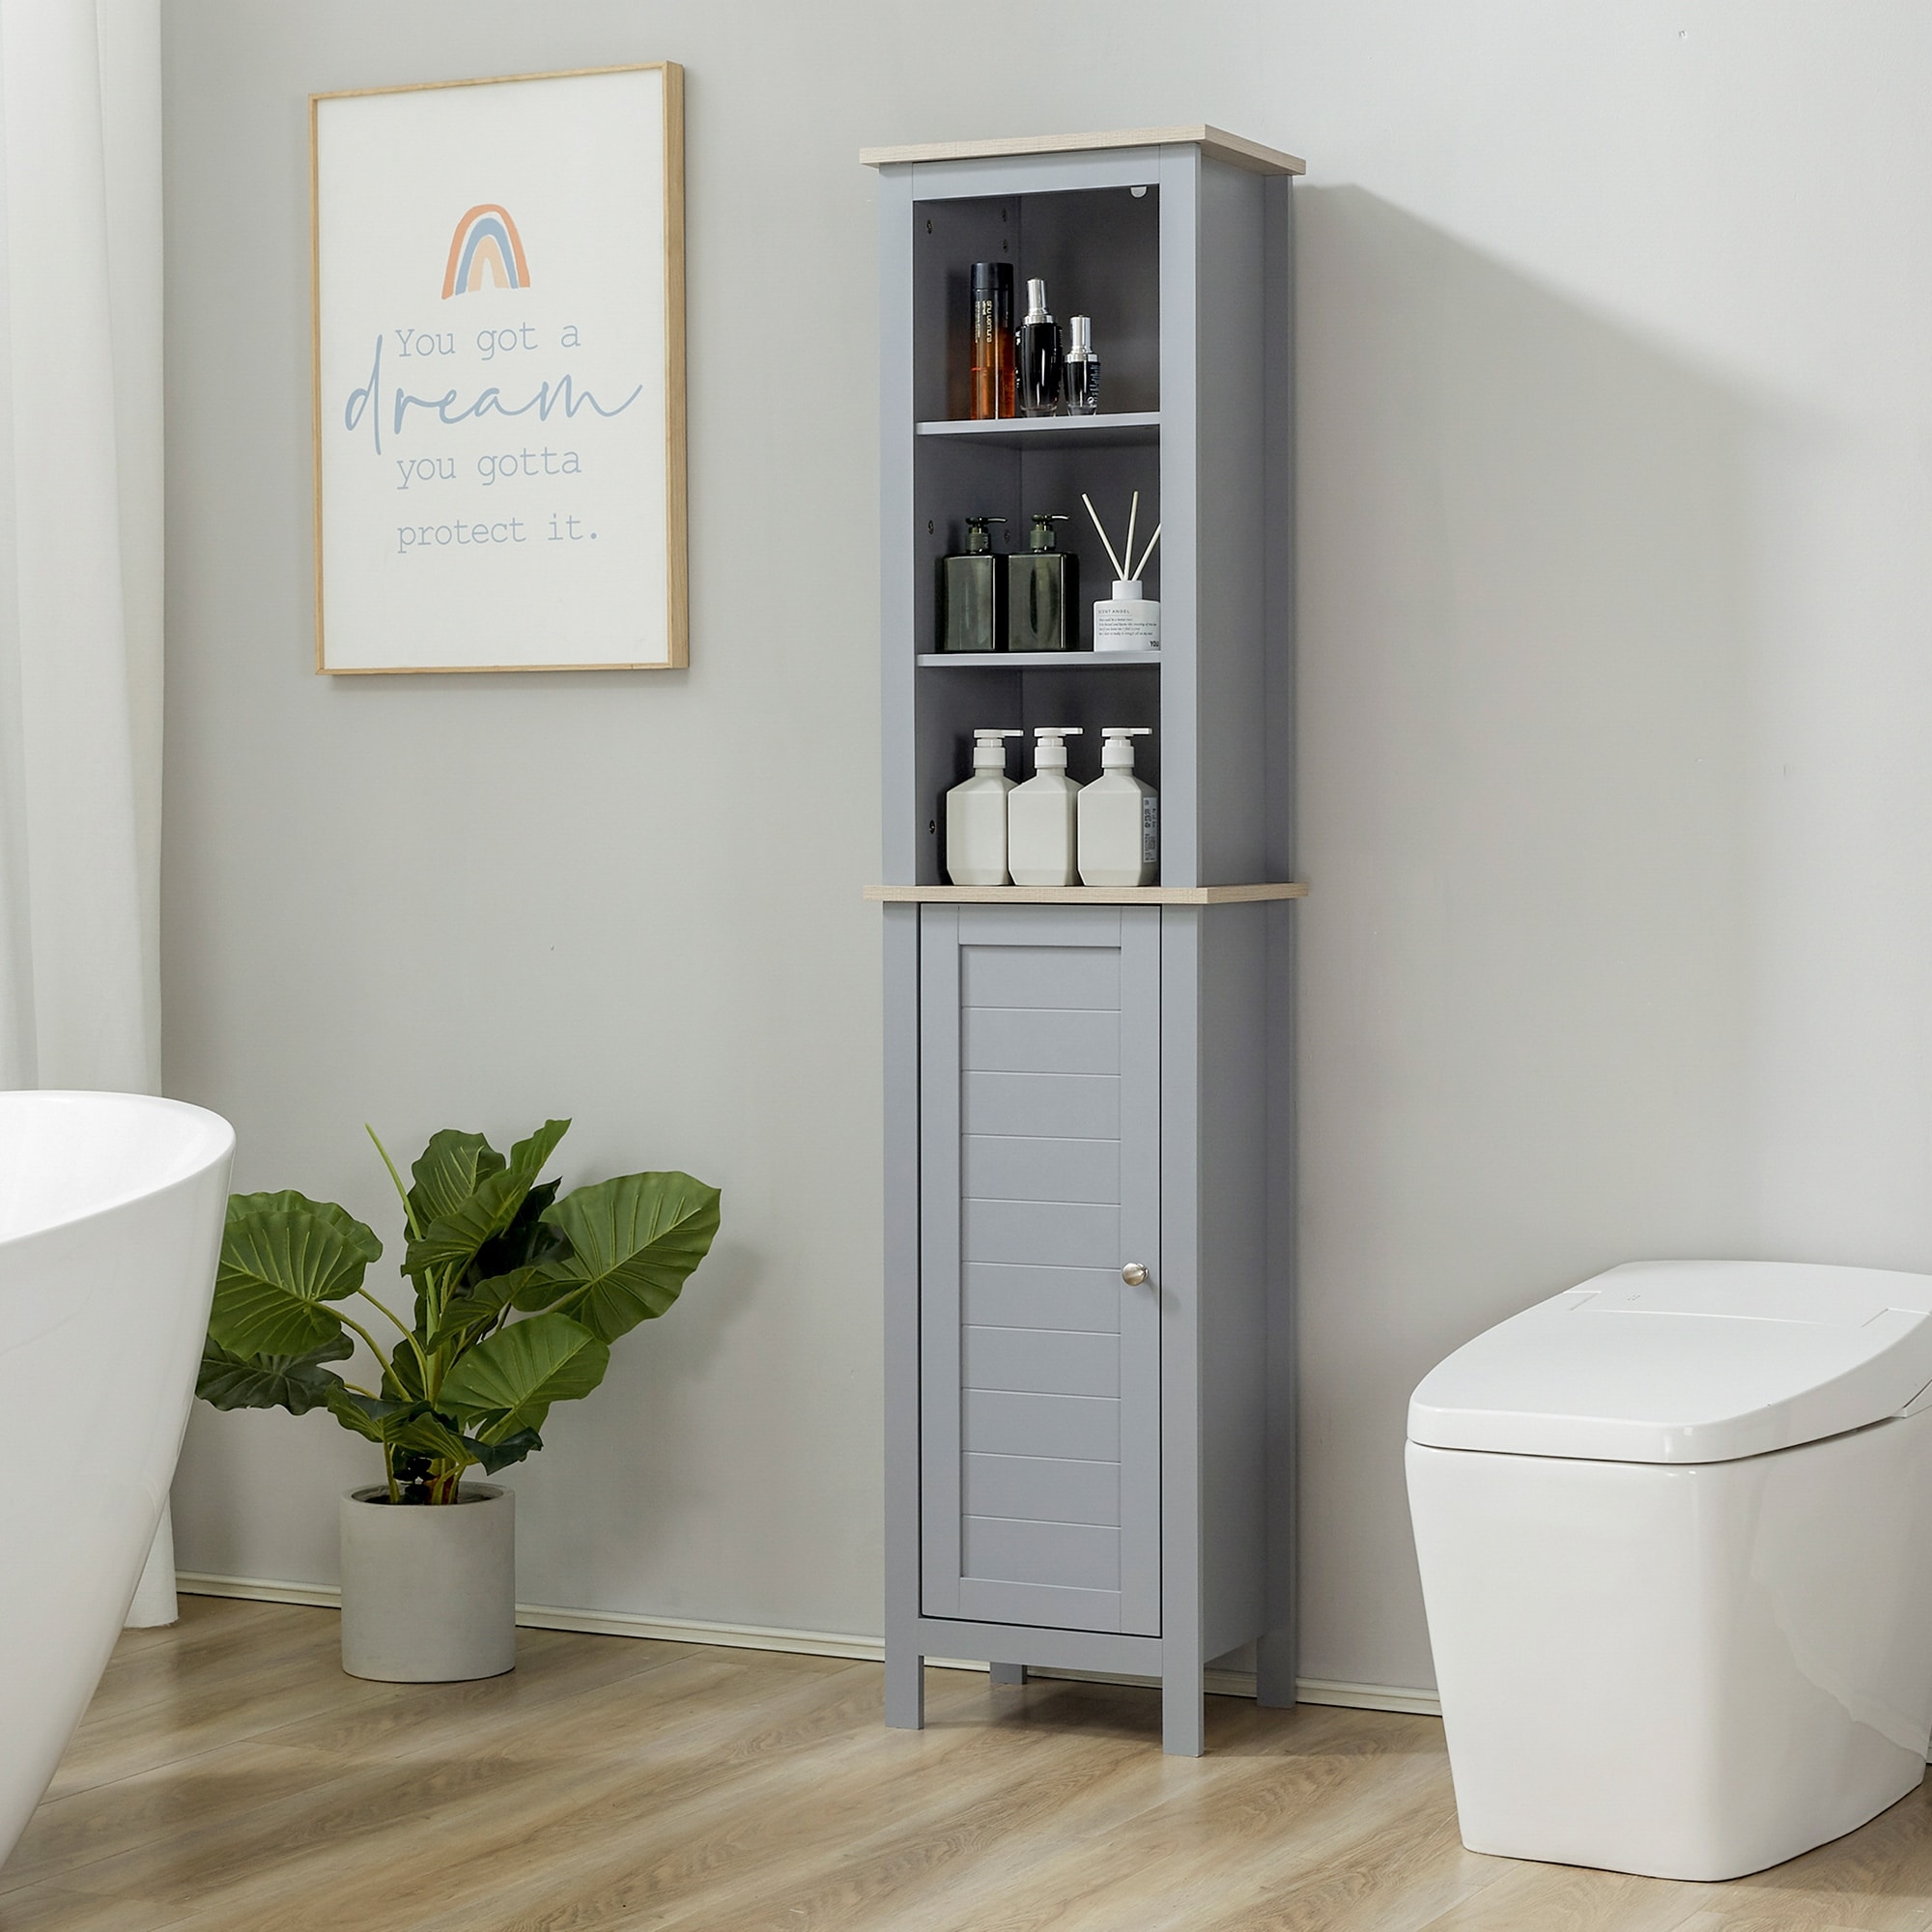 https://ak1.ostkcdn.com/images/products/is/images/direct/9214f6e0add20095a3c07a085df70c84f90ecdd5/kleankin-Bathroom-Floor-Storage-Cabinet-with-3-Tier-Shelf-and-Cupboard-with-Door%2C-Tall-Slim-Side-Organizer-Shelves%2C-Grey.jpg